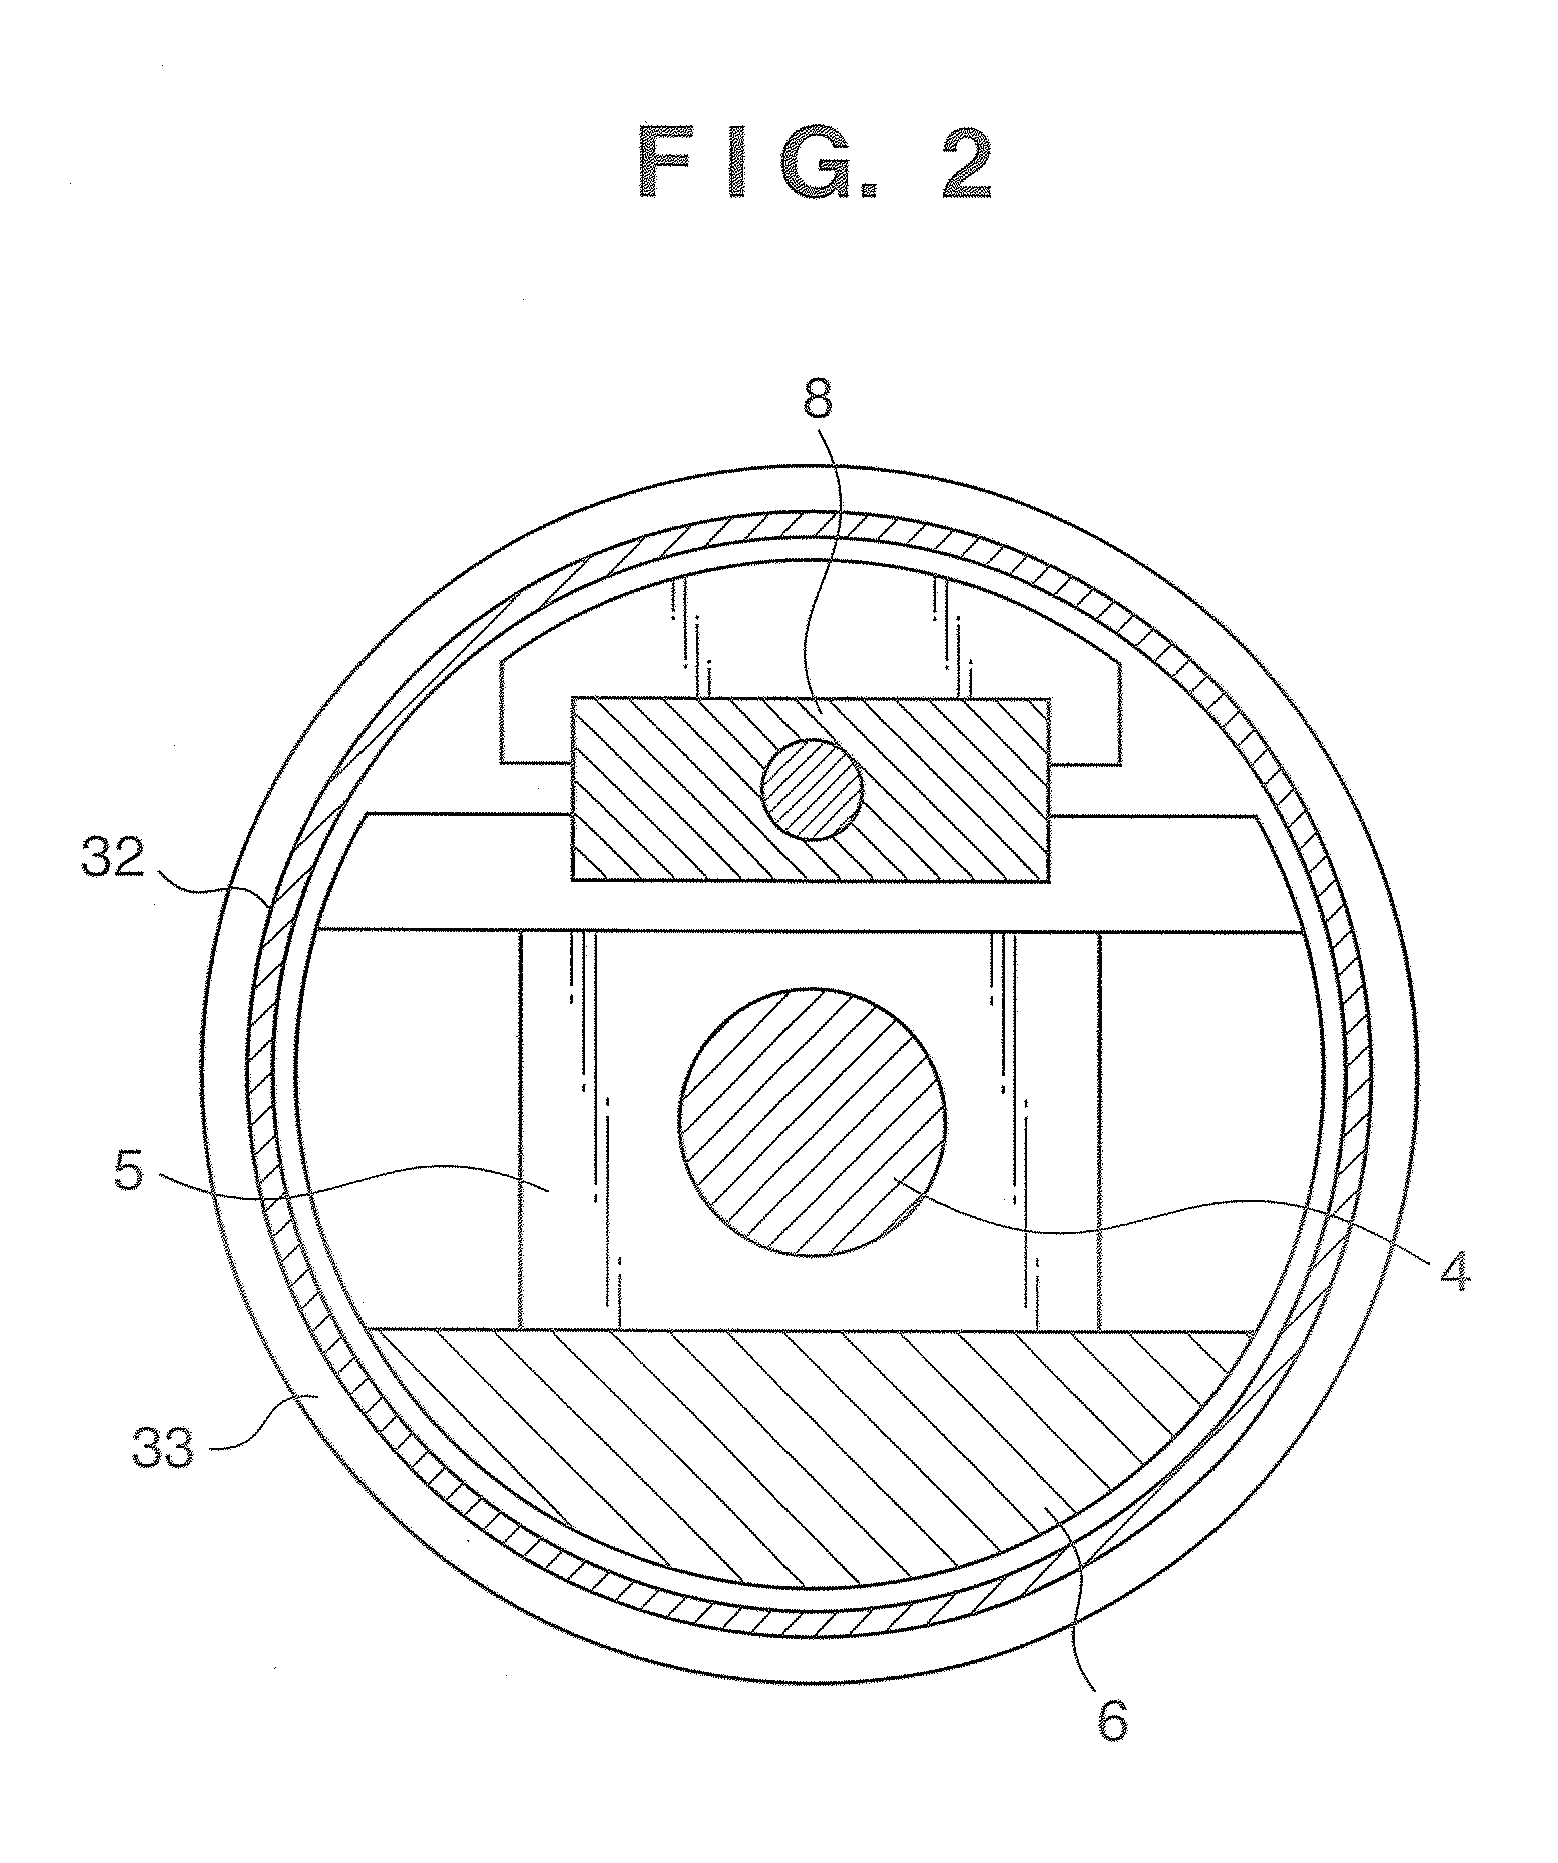 Cryotrap and vacuum processing device with cryotrap